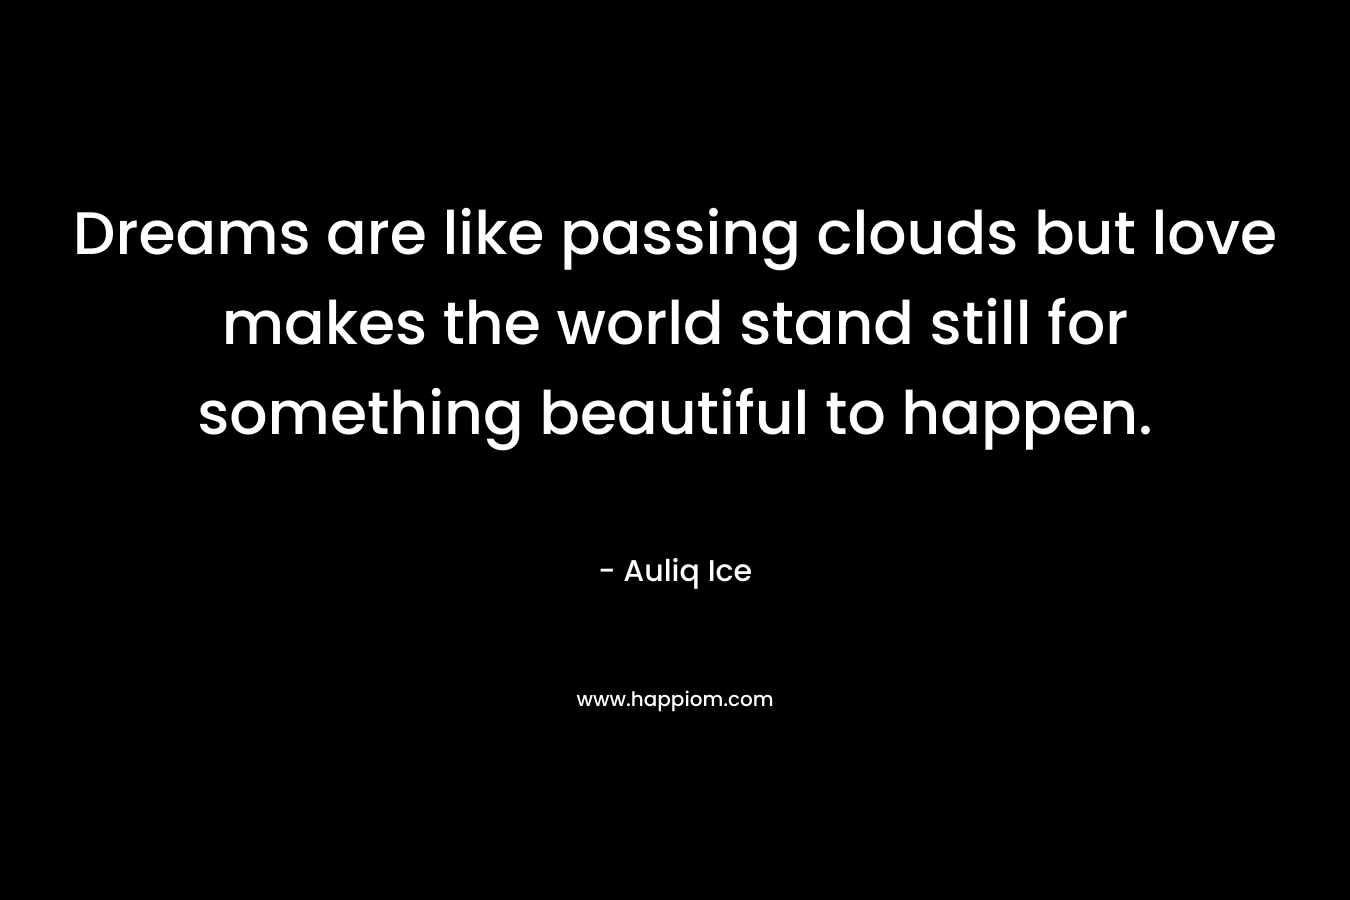 Dreams are like passing clouds but love makes the world stand still for something beautiful to happen. – Auliq Ice